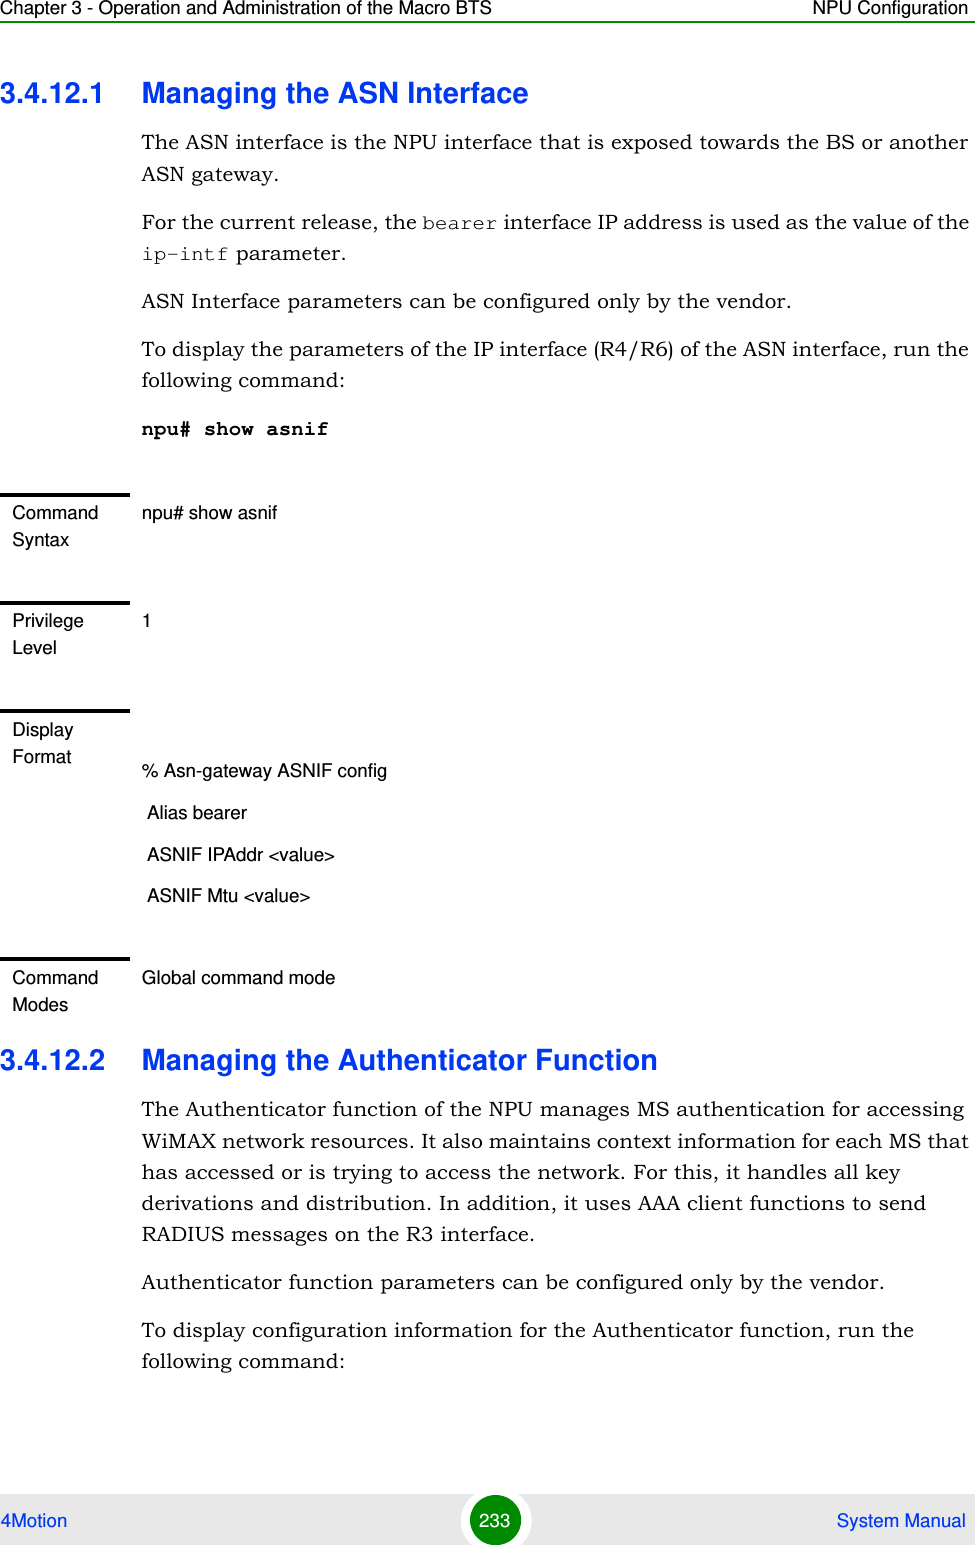 Chapter 3 - Operation and Administration of the Macro BTS NPU Configuration4Motion 233  System Manual3.4.12.1 Managing the ASN InterfaceThe ASN interface is the NPU interface that is exposed towards the BS or another ASN gateway.For the current release, the bearer interface IP address is used as the value of the ip-intf parameter.ASN Interface parameters can be configured only by the vendor.To display the parameters of the IP interface (R4/R6) of the ASN interface, run the following command:npu# show asnif3.4.12.2 Managing the Authenticator FunctionThe Authenticator function of the NPU manages MS authentication for accessing WiMAX network resources. It also maintains context information for each MS that has accessed or is trying to access the network. For this, it handles all key derivations and distribution. In addition, it uses AAA client functions to send RADIUS messages on the R3 interface.Authenticator function parameters can be configured only by the vendor.To display configuration information for the Authenticator function, run the following command:Command Syntaxnpu# show asnifPrivilege Level1Display Format % Asn-gateway ASNIF config Alias bearer ASNIF IPAddr &lt;value&gt; ASNIF Mtu &lt;value&gt;Command ModesGlobal command mode